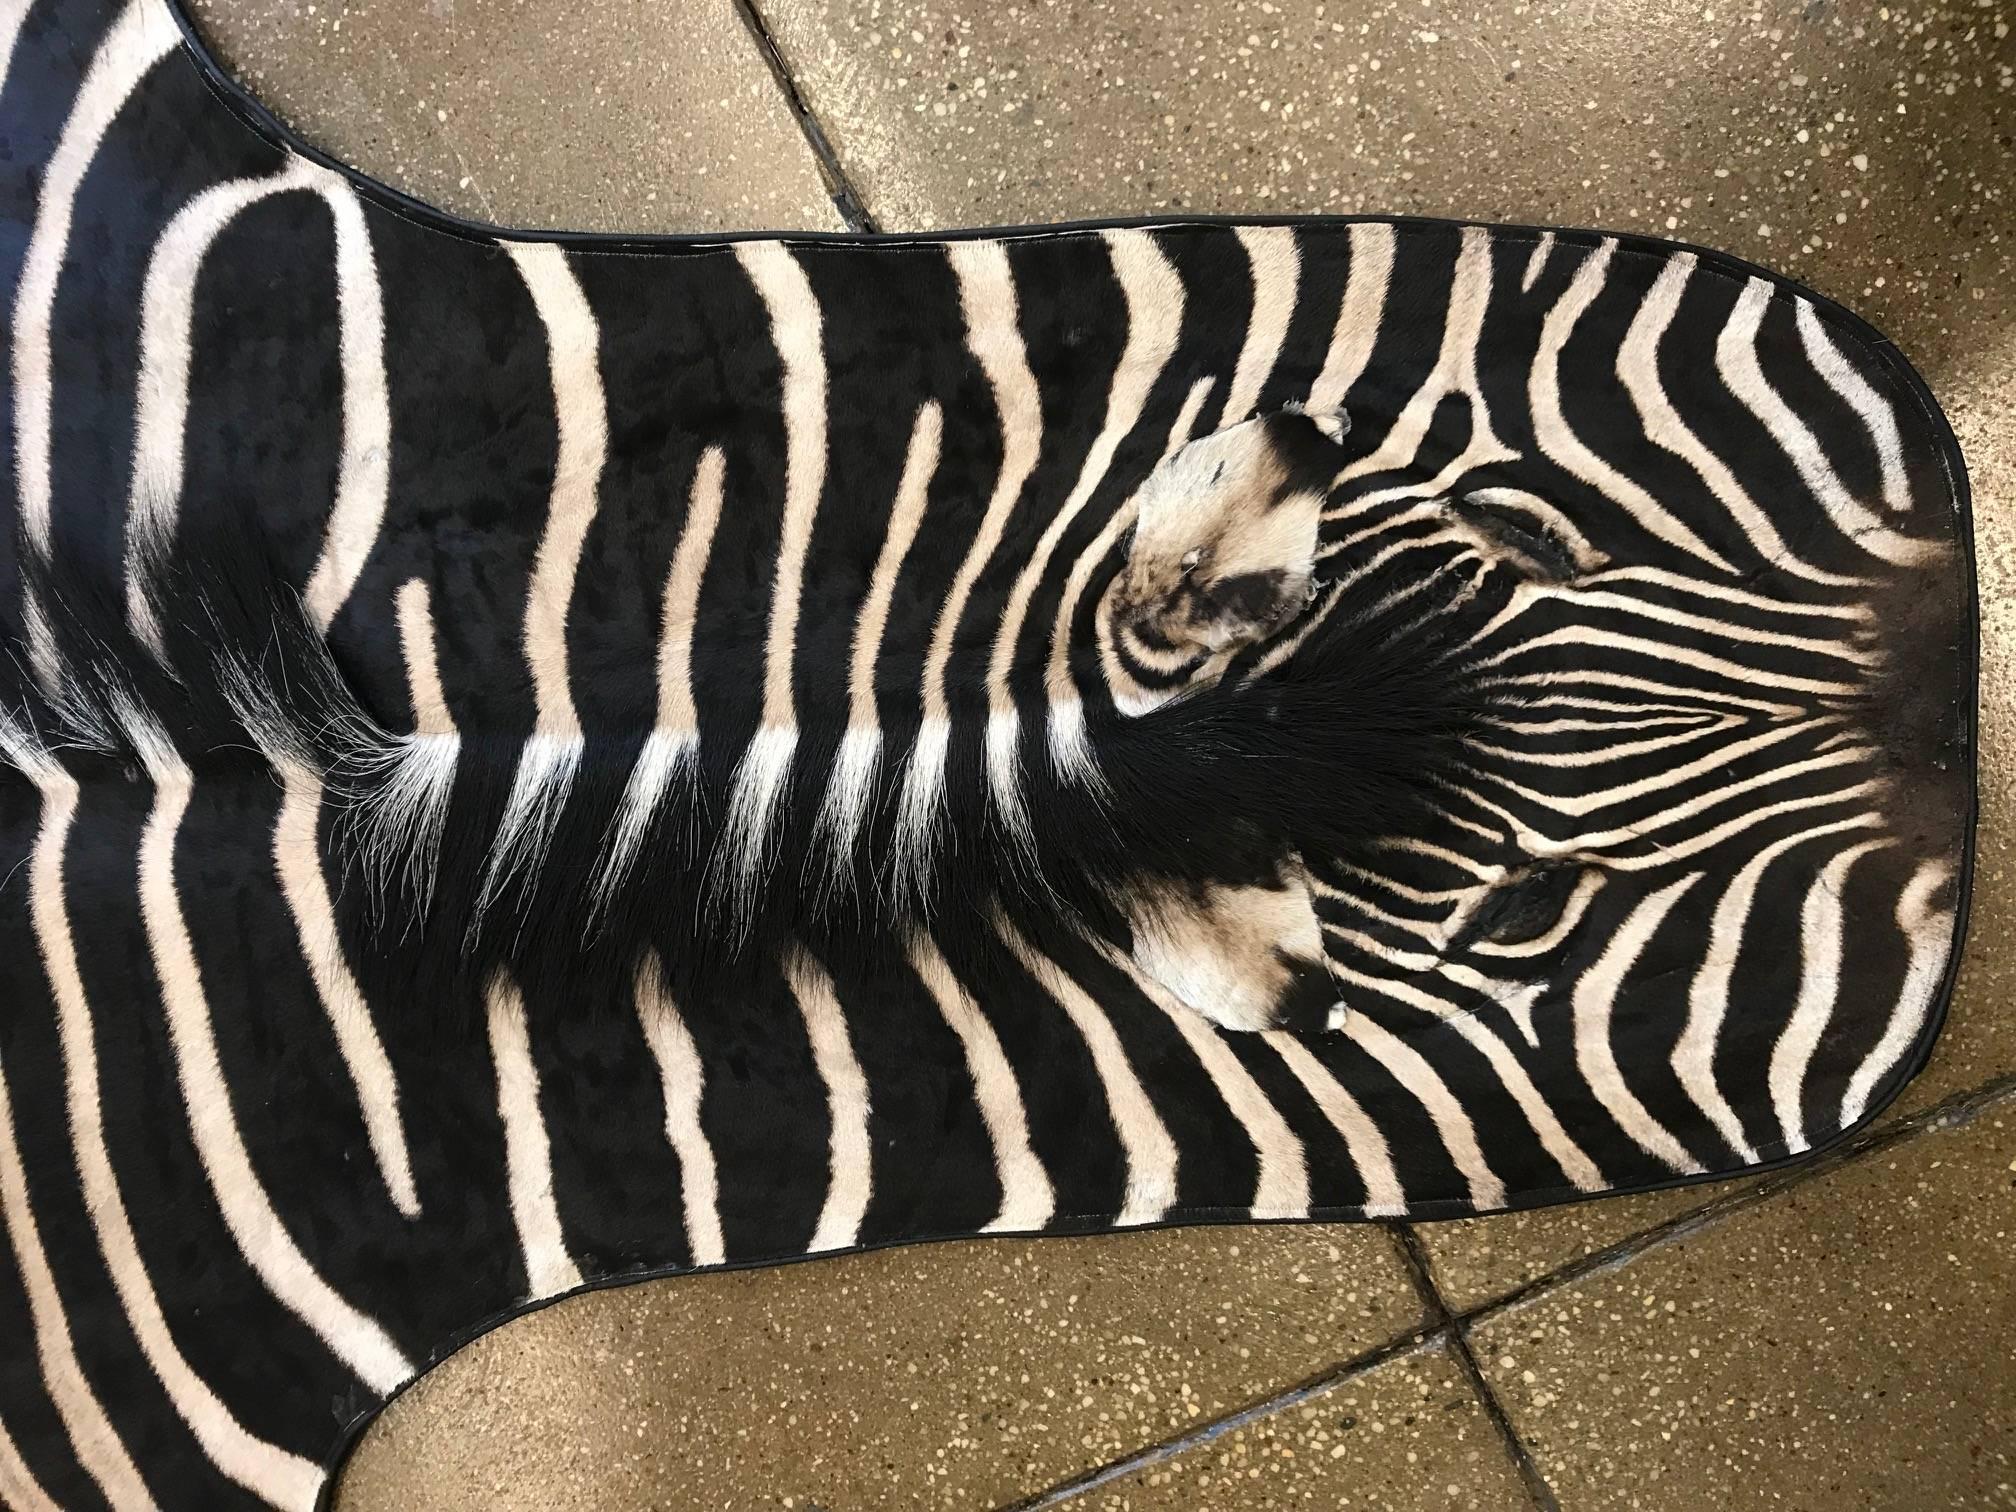 Beautiful grade A zebra skin rug lined with leather trimmed edge
Measures: 7'8'' x 5' long excluding the tail 
Wide variety of hides in different sizes and qualities

 